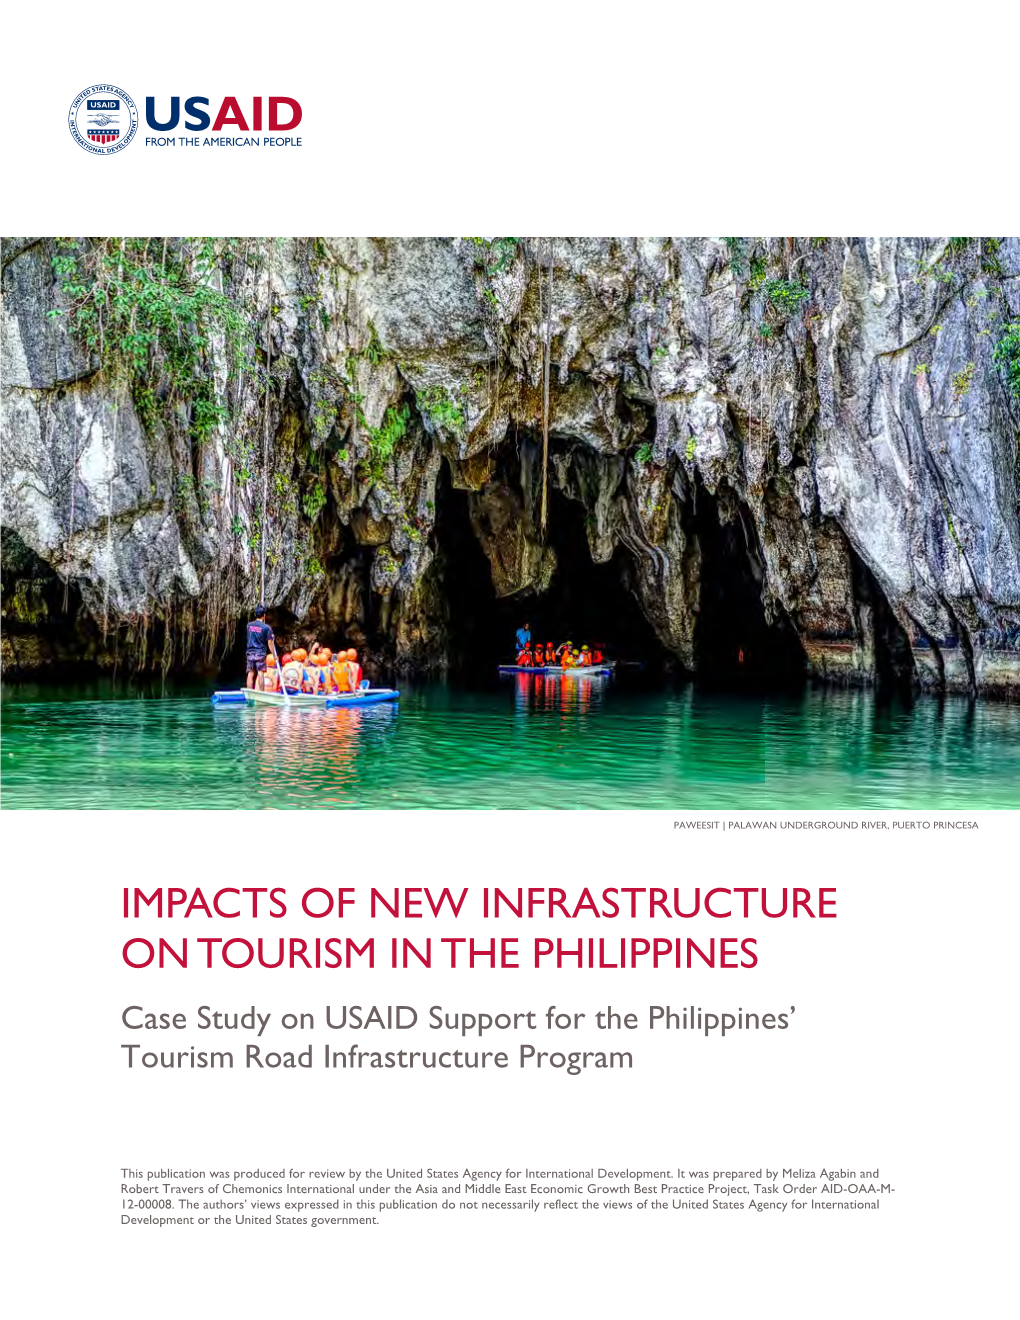 IMPACTS of NEW INFRASTRUCTURE on TOURISM in the PHILIPPINES Case Study on USAID Support for the Philippines’ Tourism Road Infrastructure Program